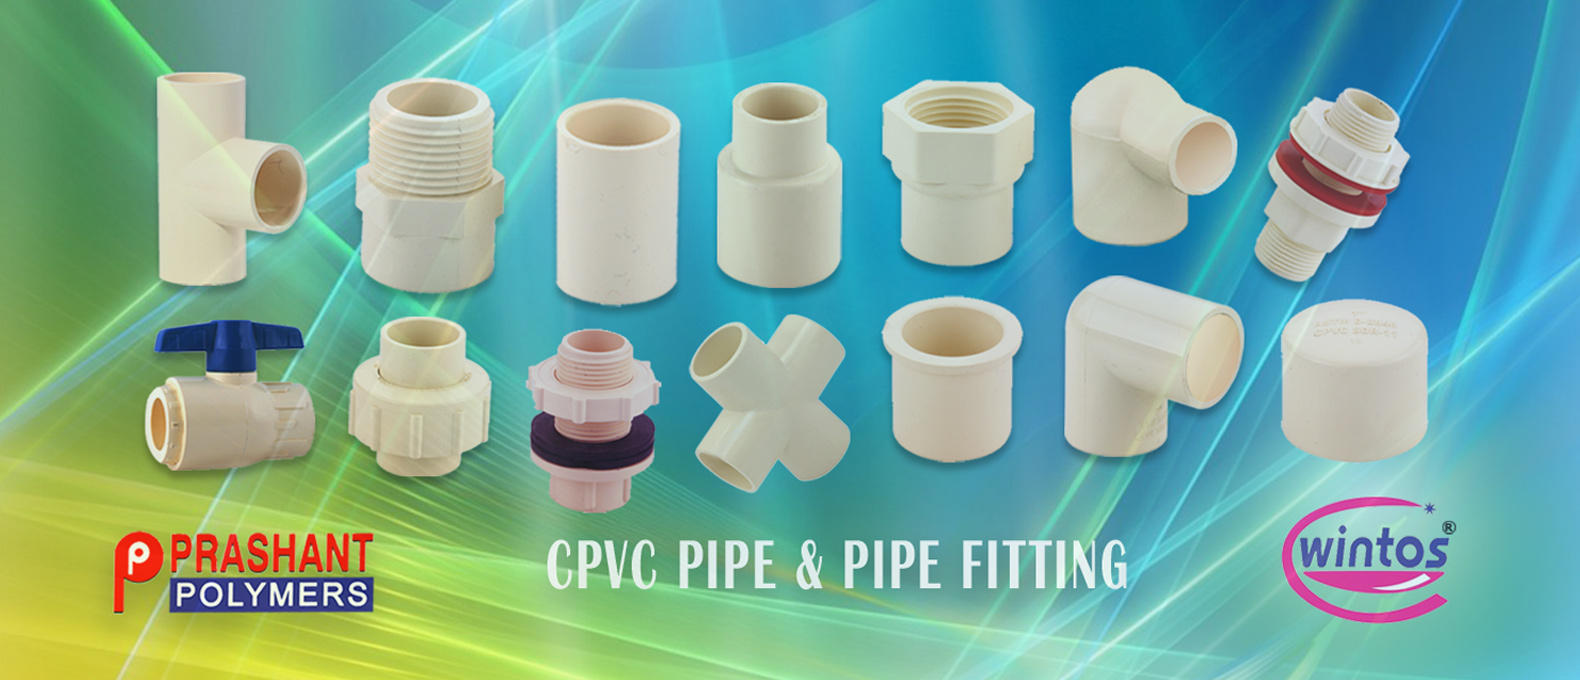 CPVC Pipe Fitting Elbow-Tee-Bush-Socket-Reducer-mta-fta CPVC Fitting - CPVC Brass fittings - CPVC Plumbing Pipe Fittings Manufacturers